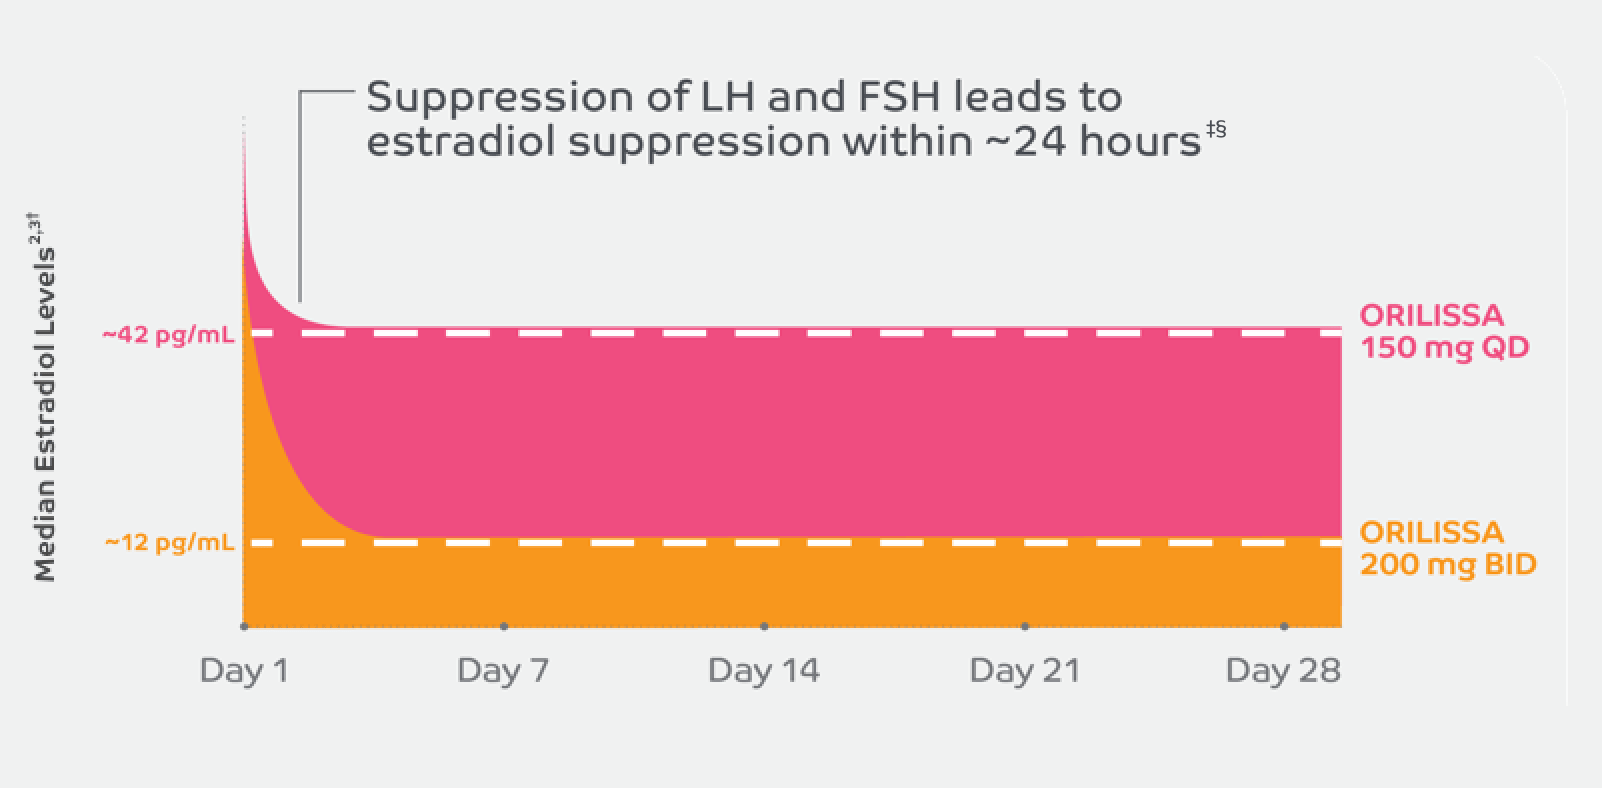 Dose-dependent degree of estradiol suppression 24 hours after a single dose hormone suppression 4 to 6 hours after a single dose